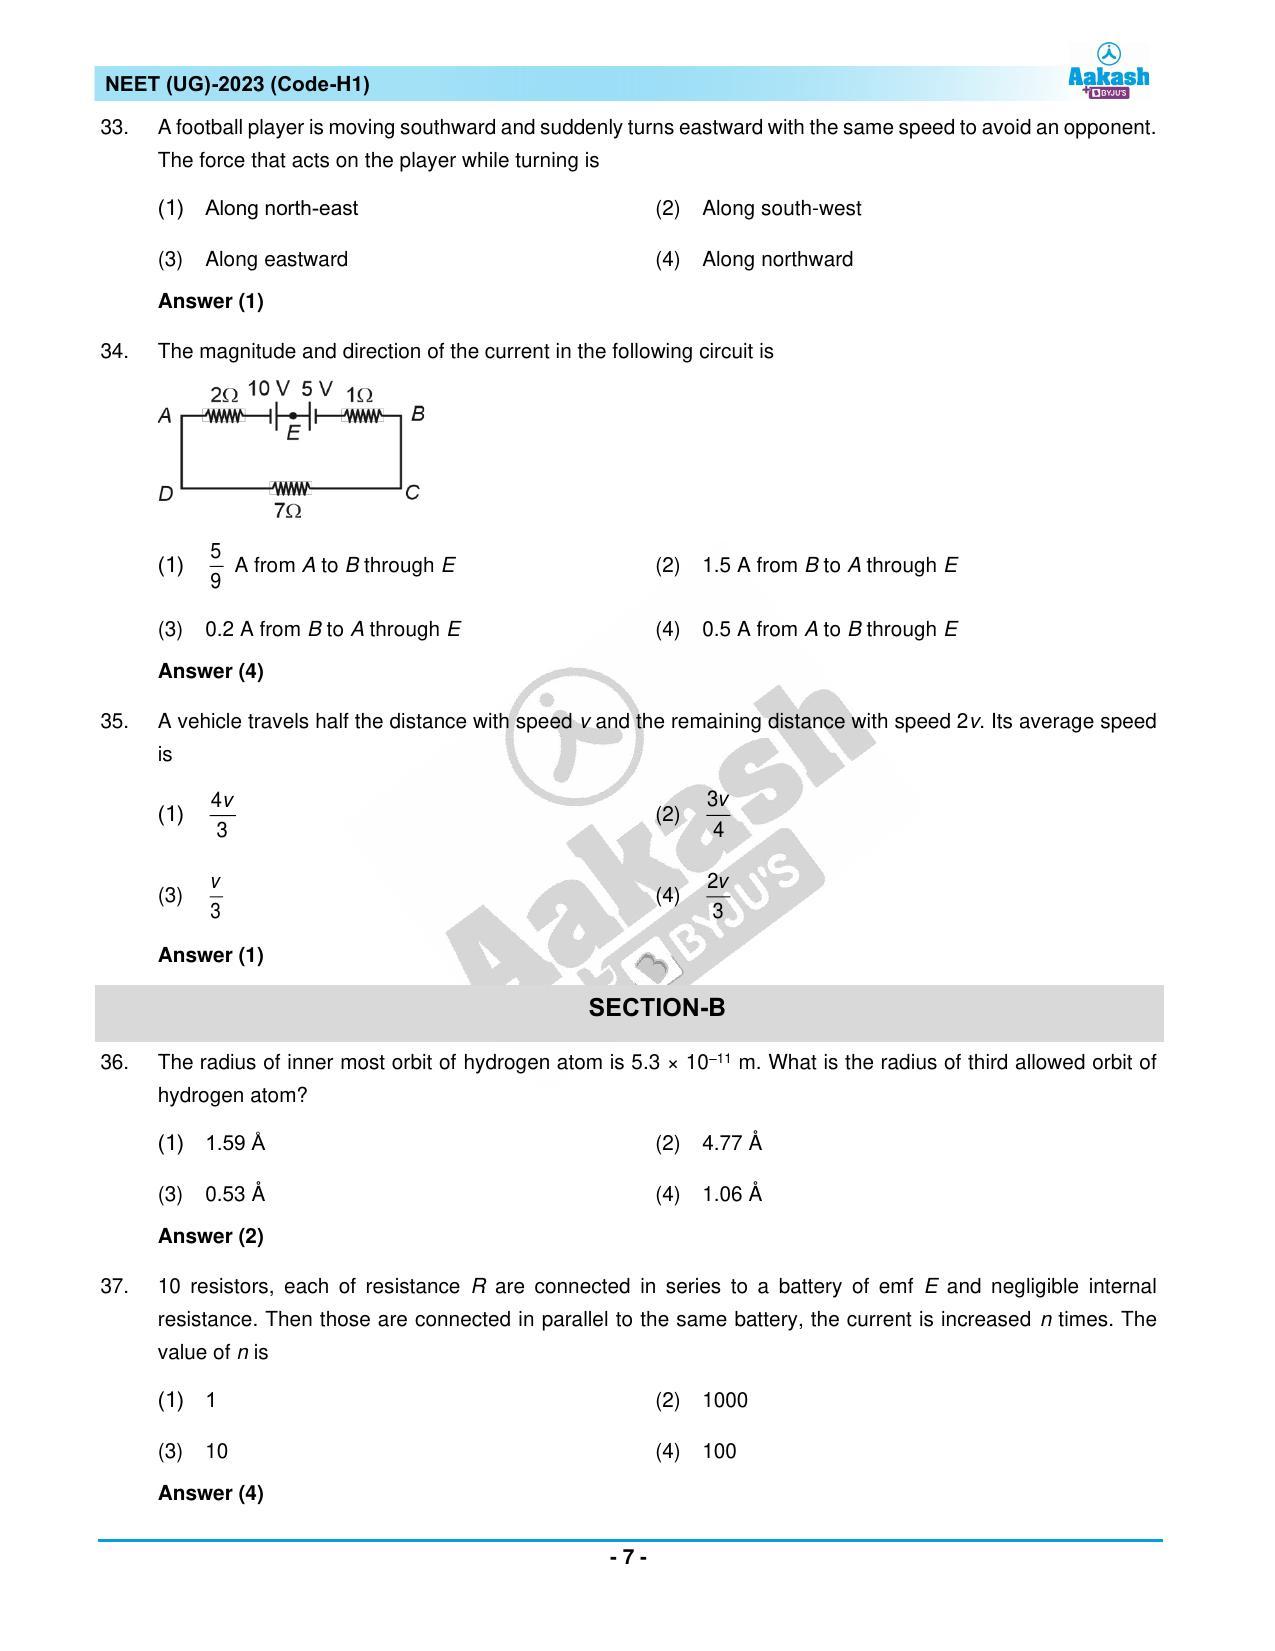 NEET 2023 Question Paper H1 - Page 7